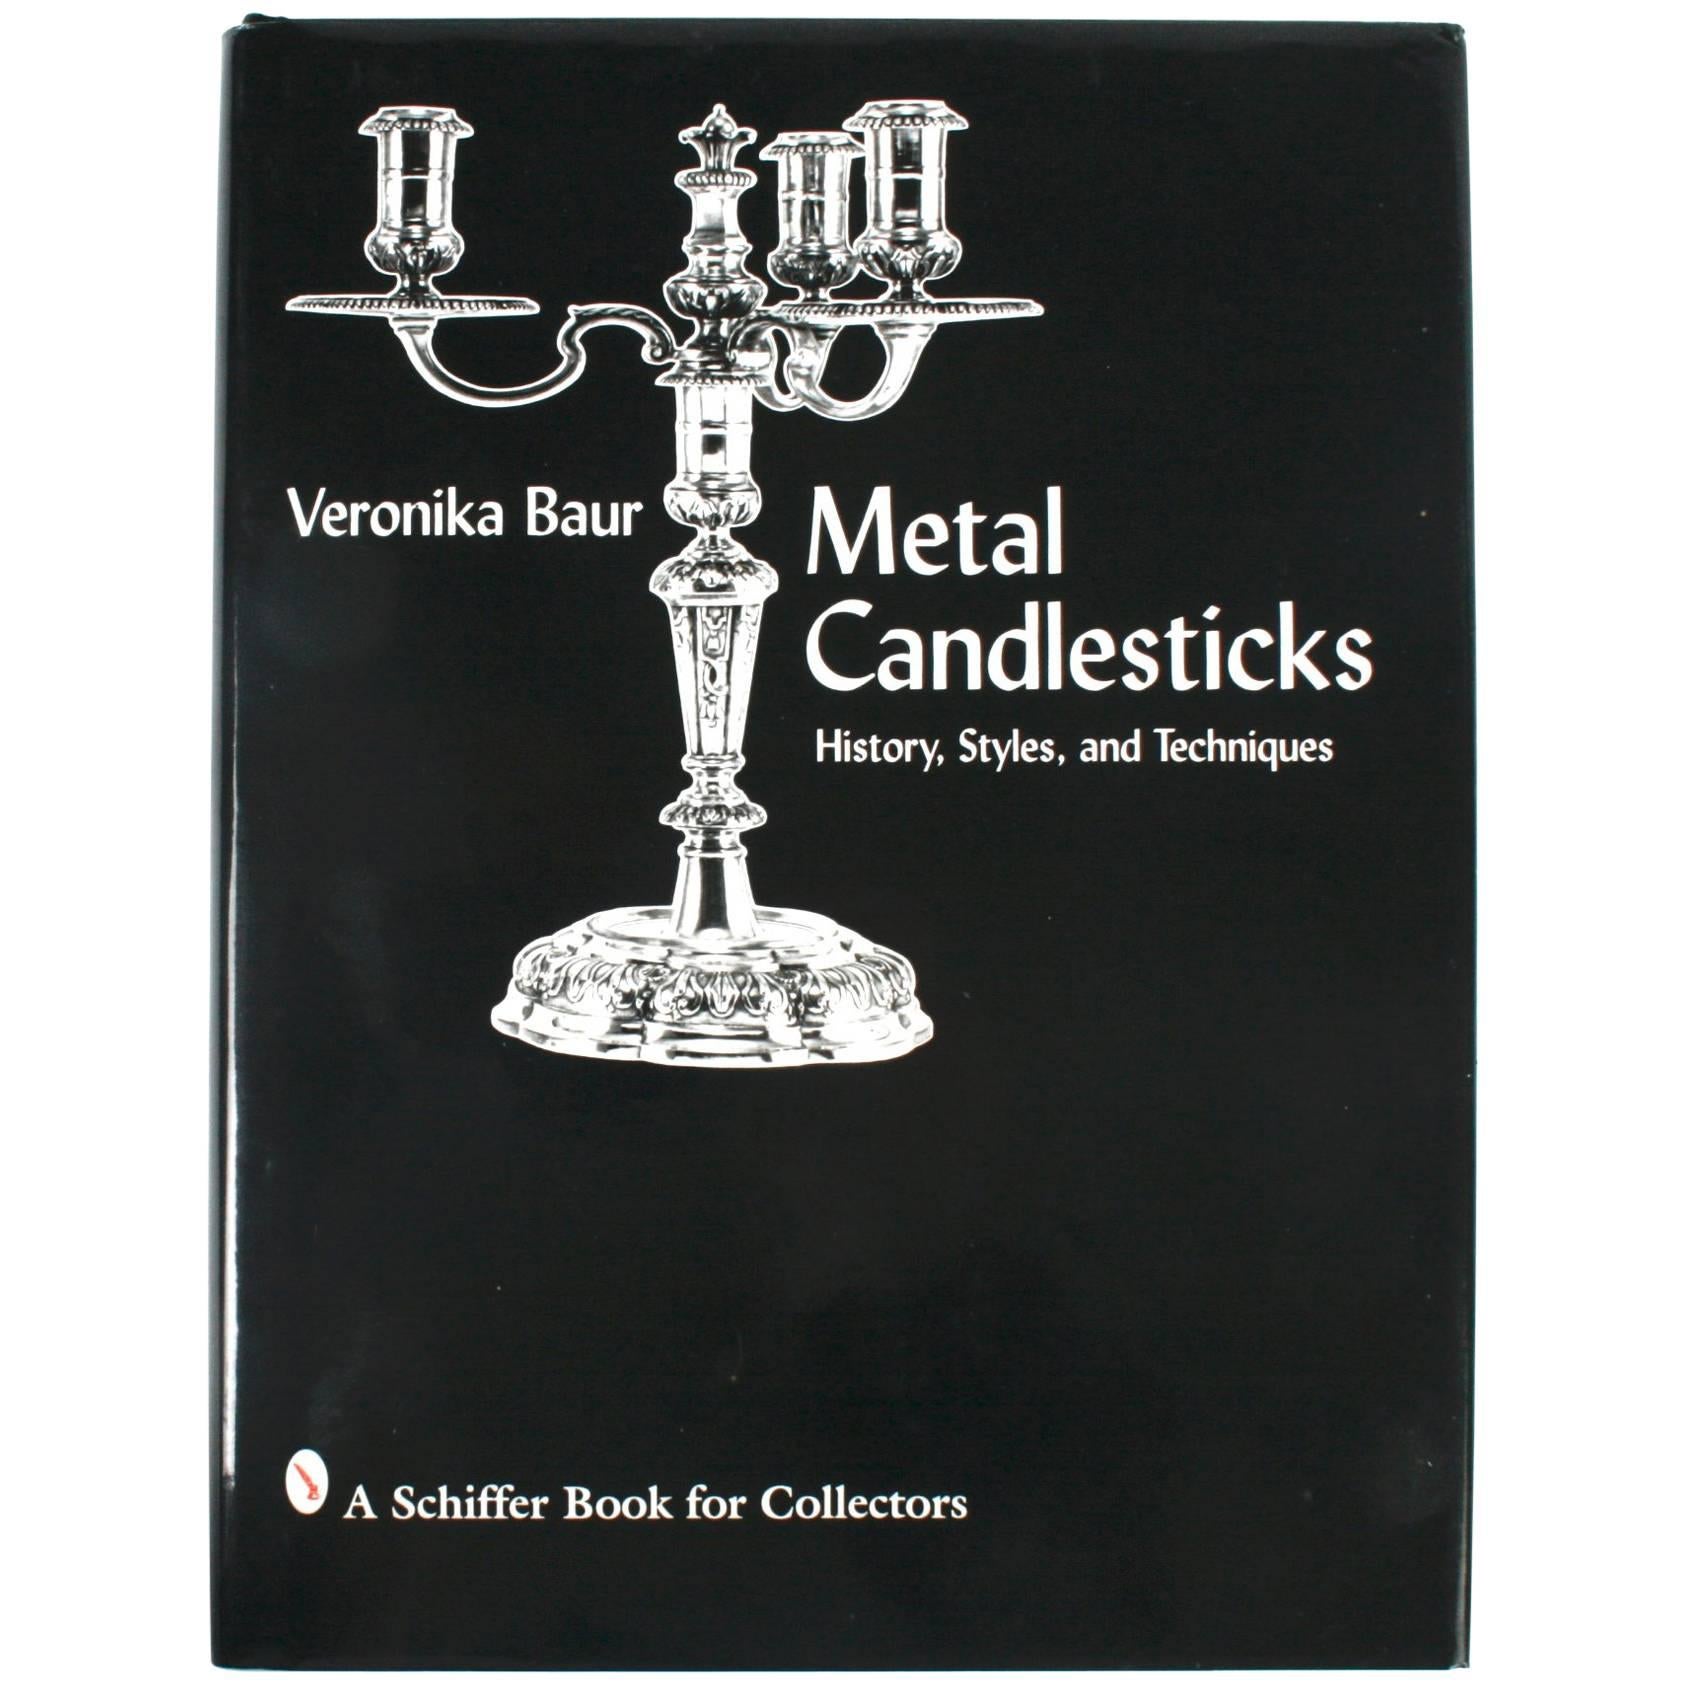 Metal Candlesticks, History, Styles and Techniques by Veronica Baur 1st Ed For Sale